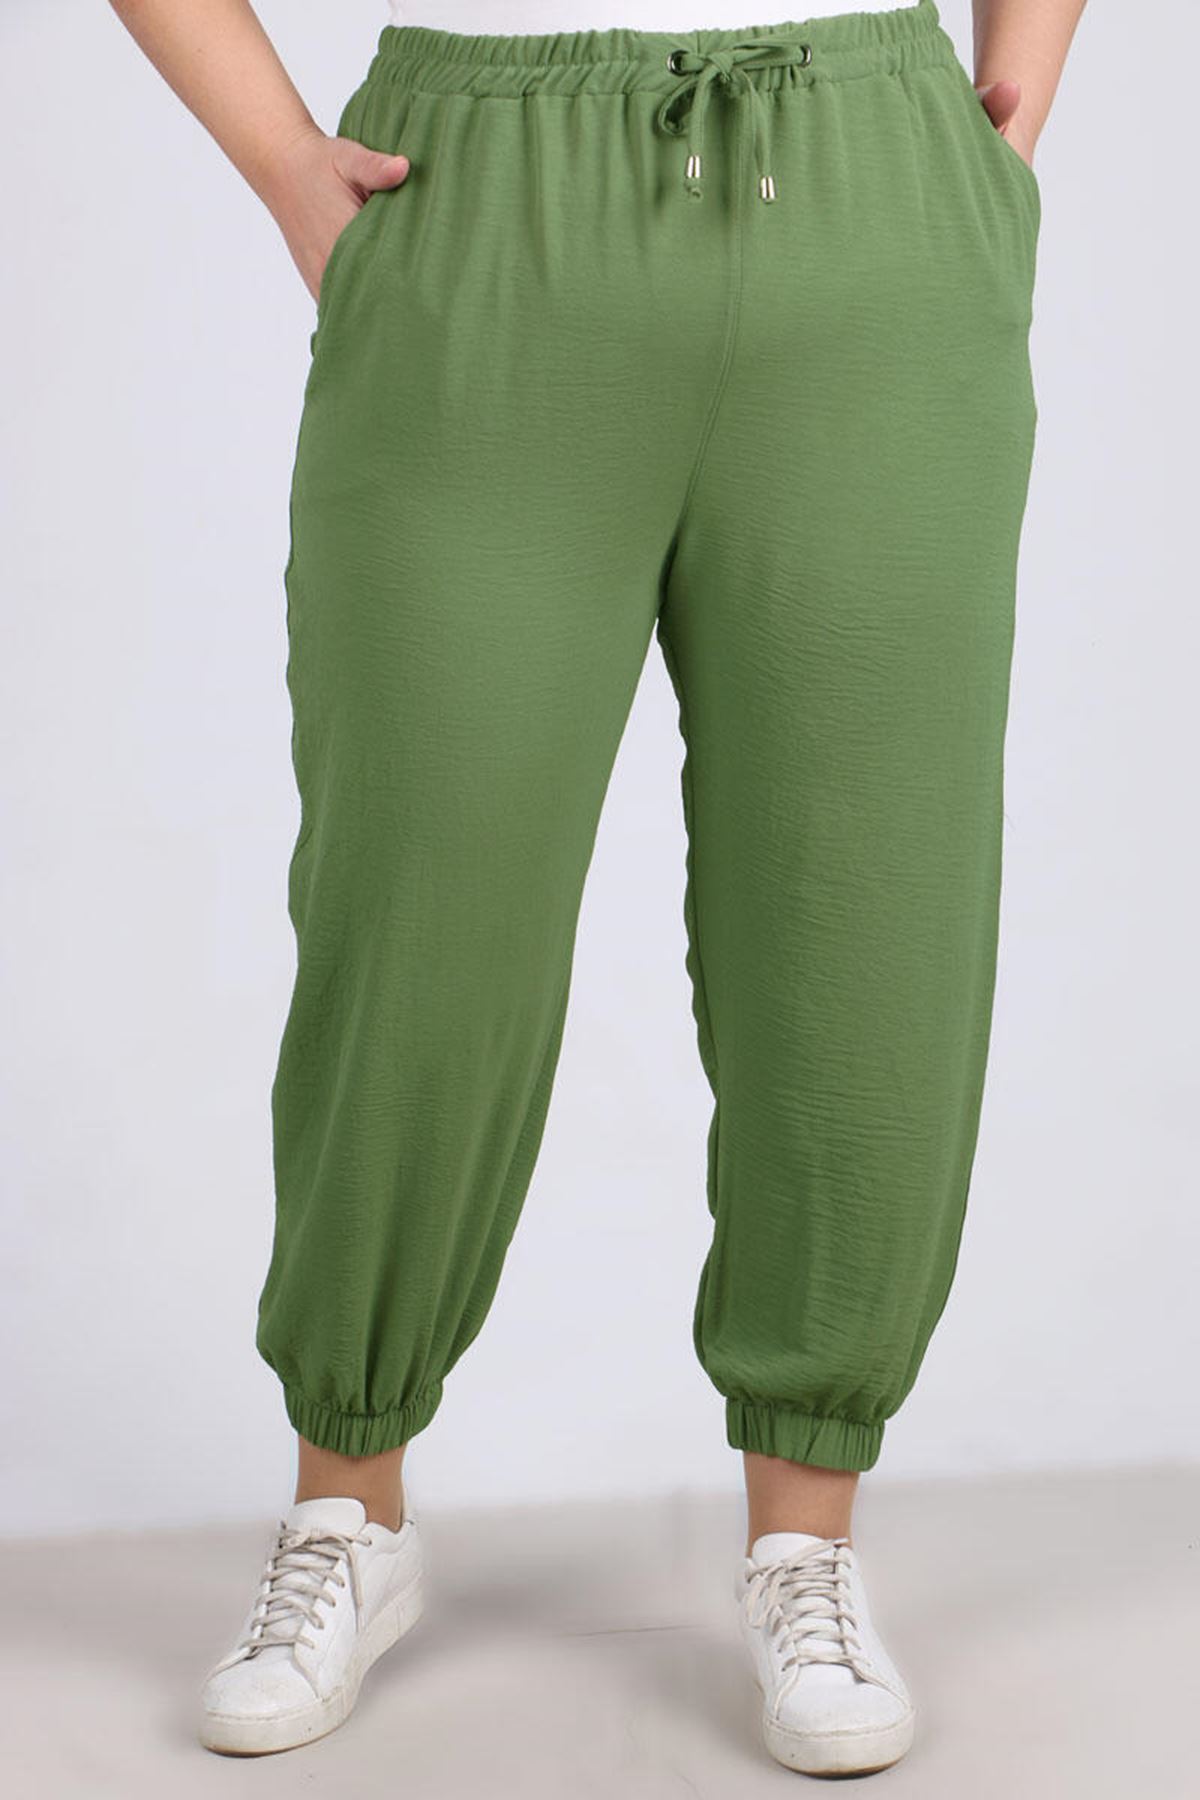 9113 Plus Size Pants with Elastic Waist and Trotters - Khaki